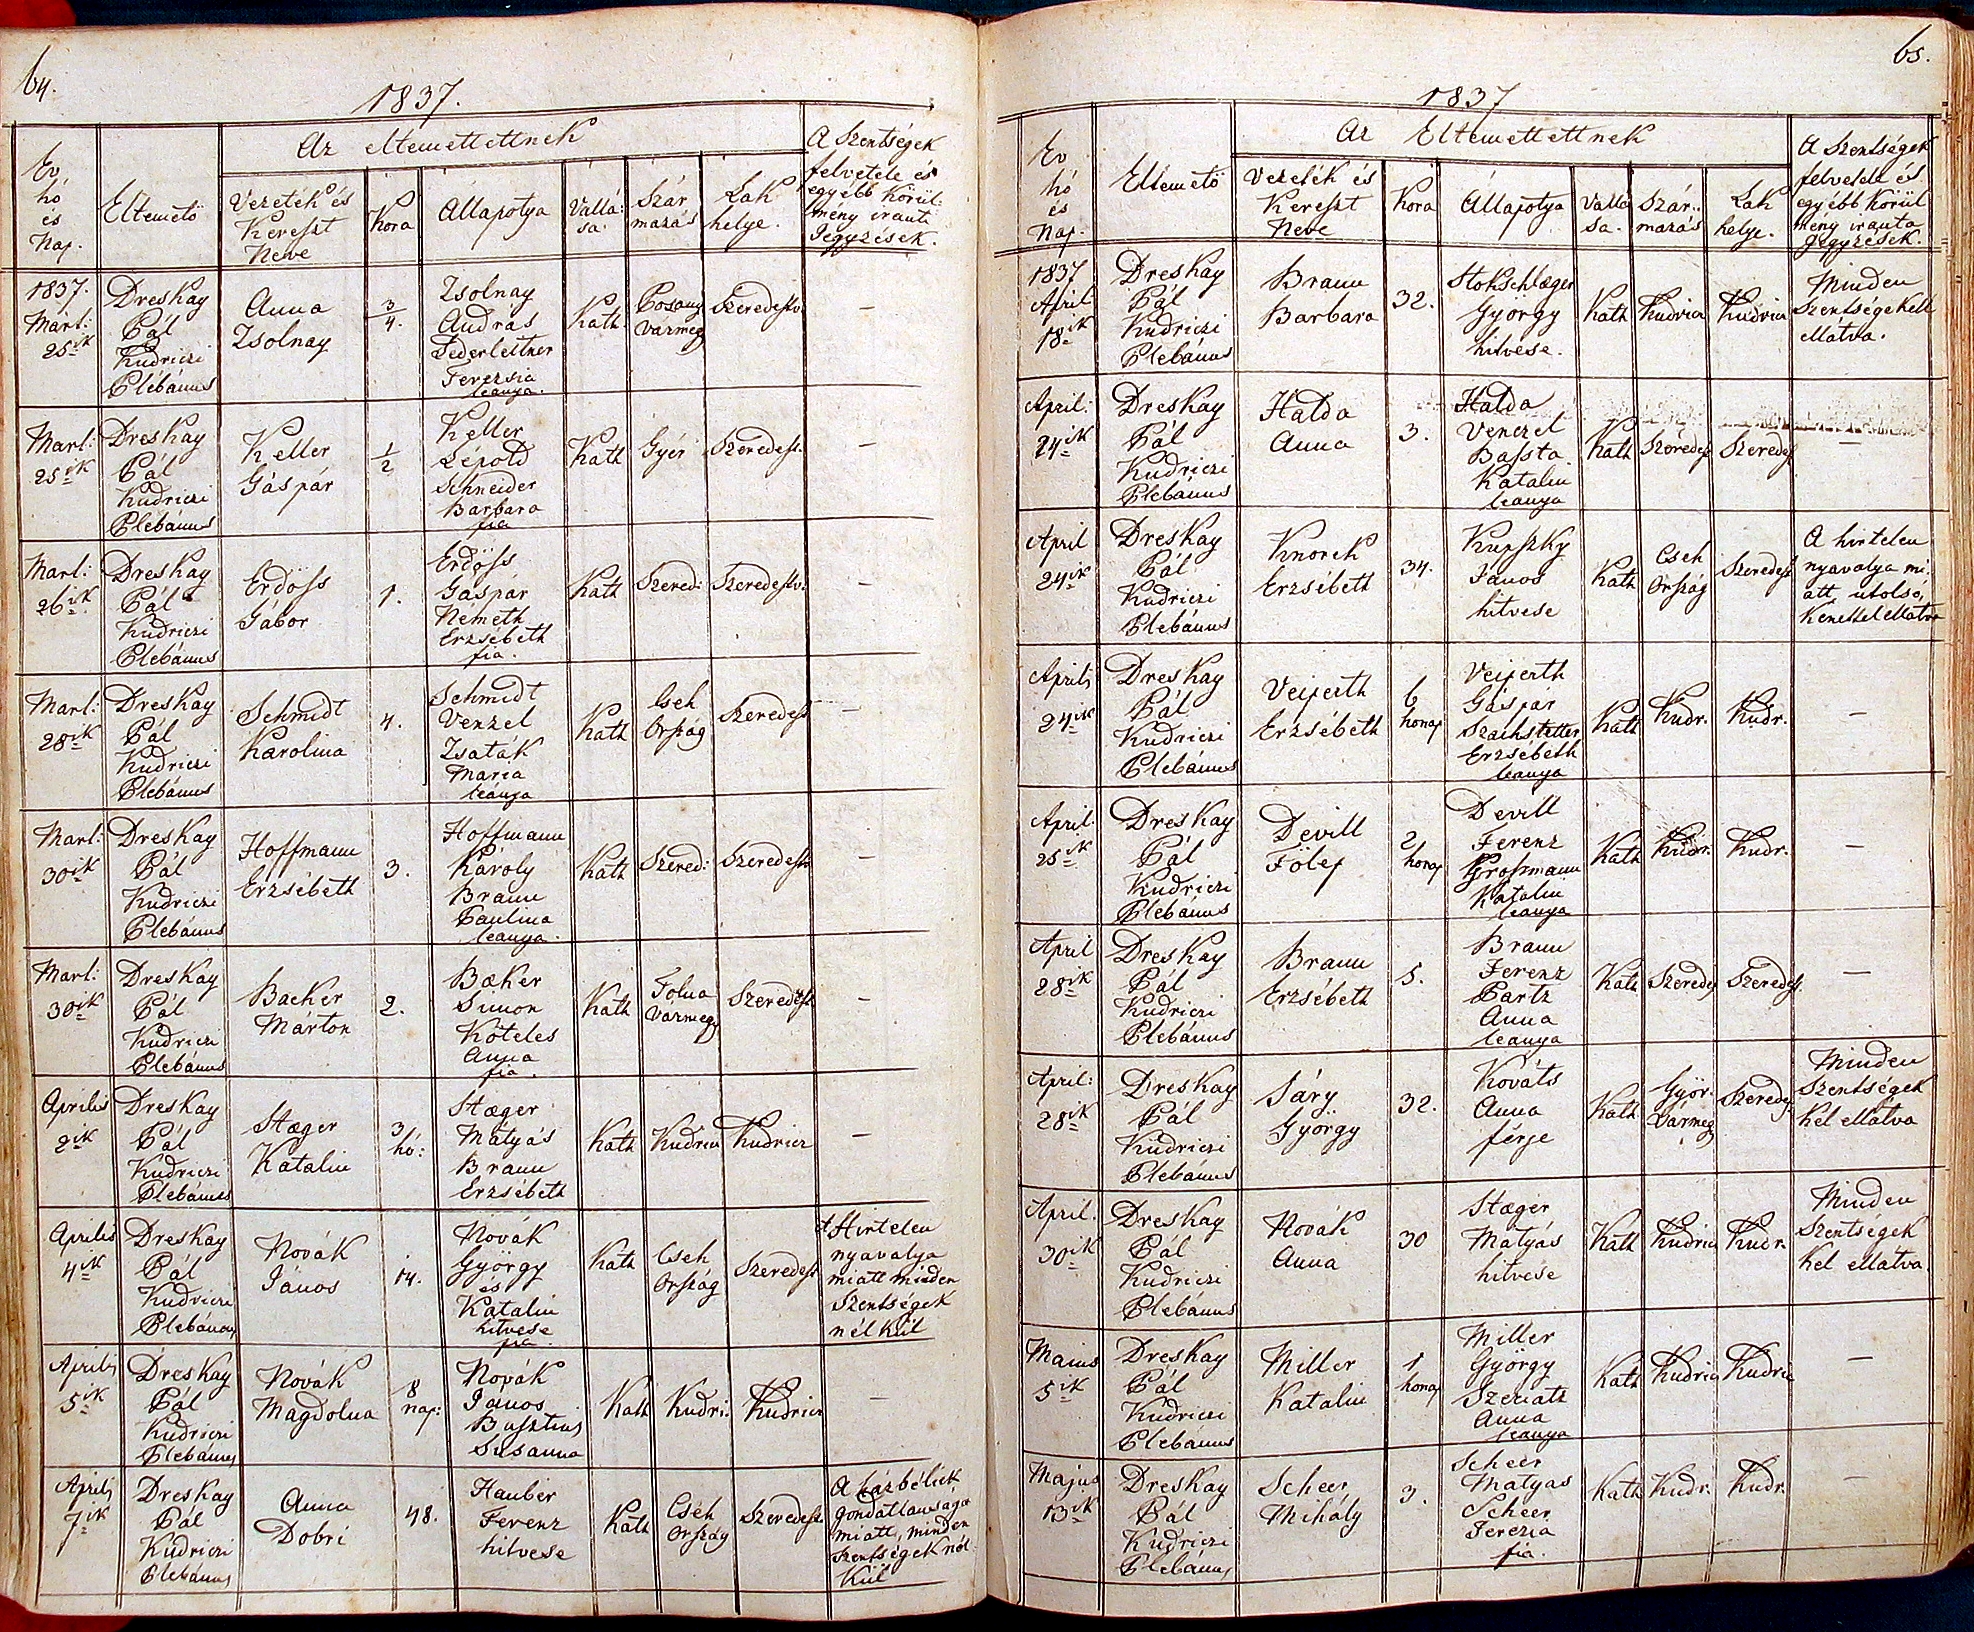 images/church_records/DEATHS/1829-1851D/064 i 065